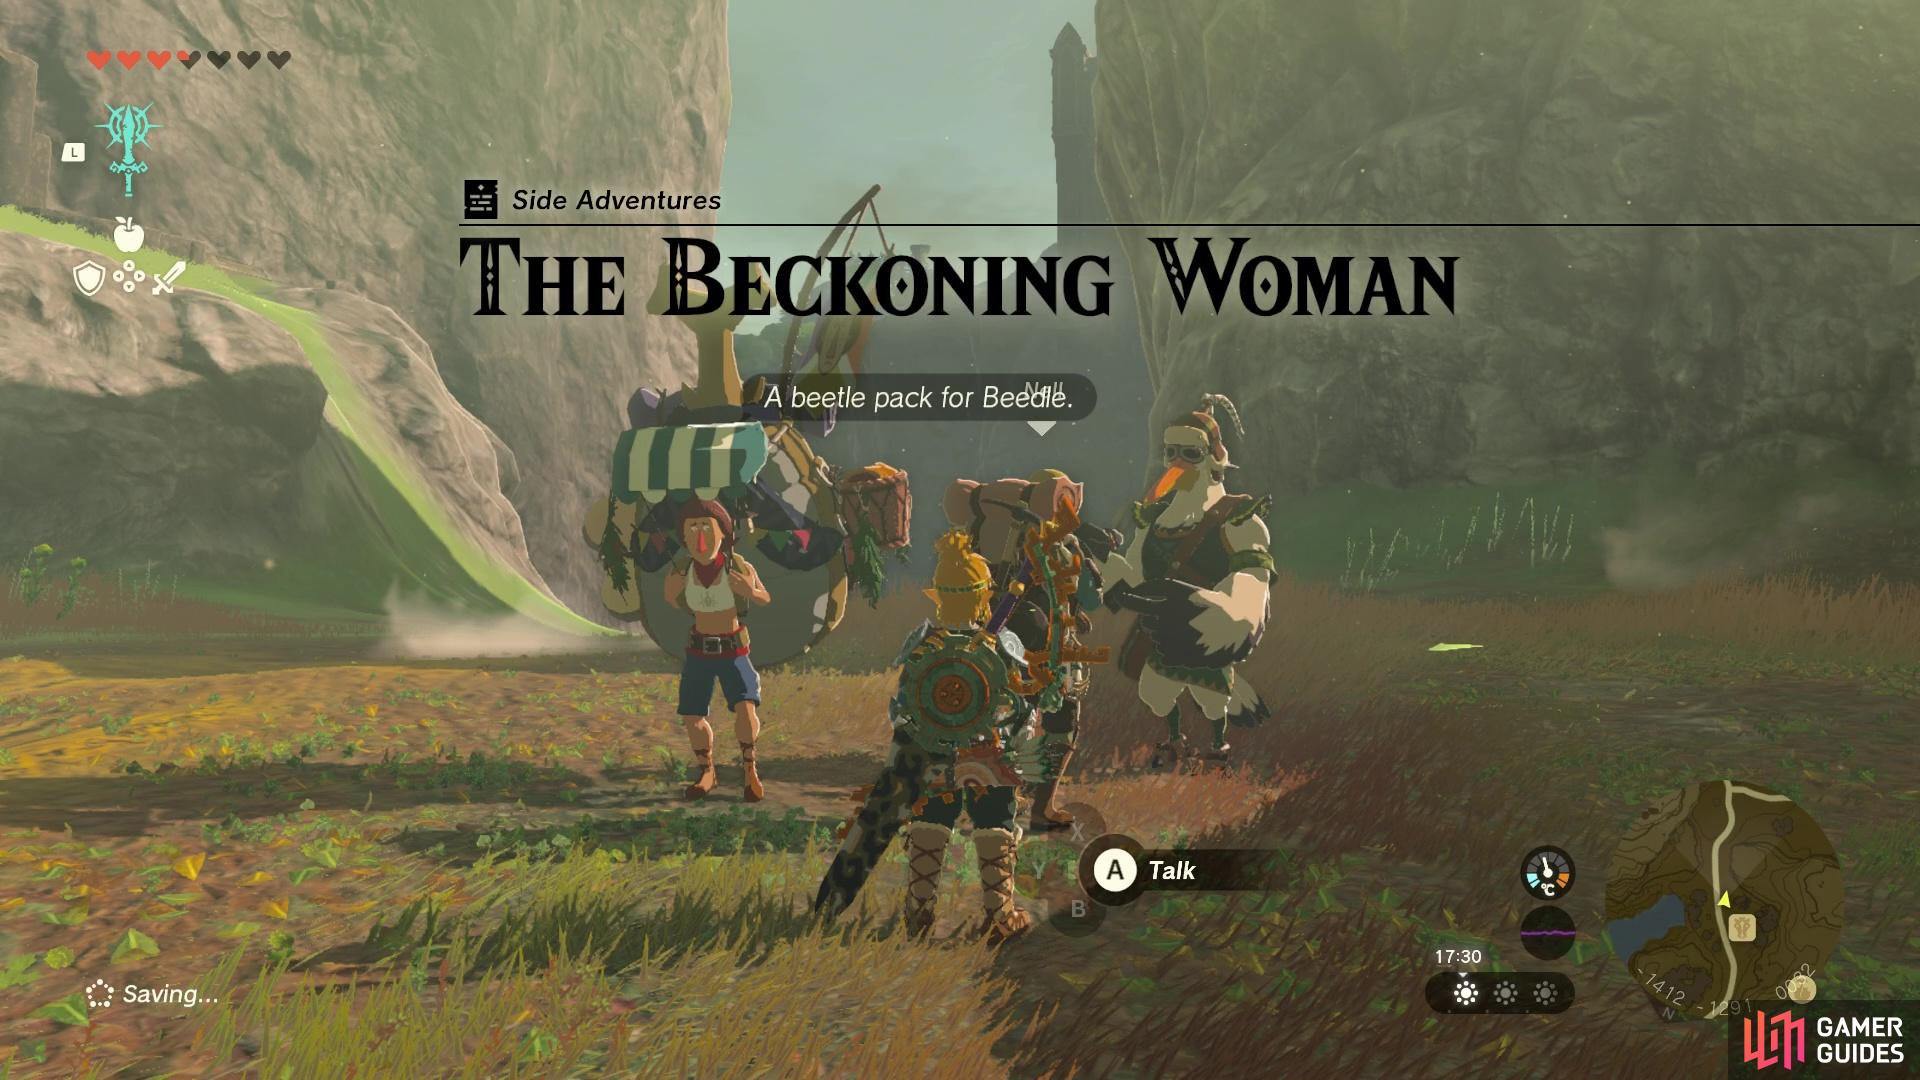 The Beckoning Woman Side Adventure.